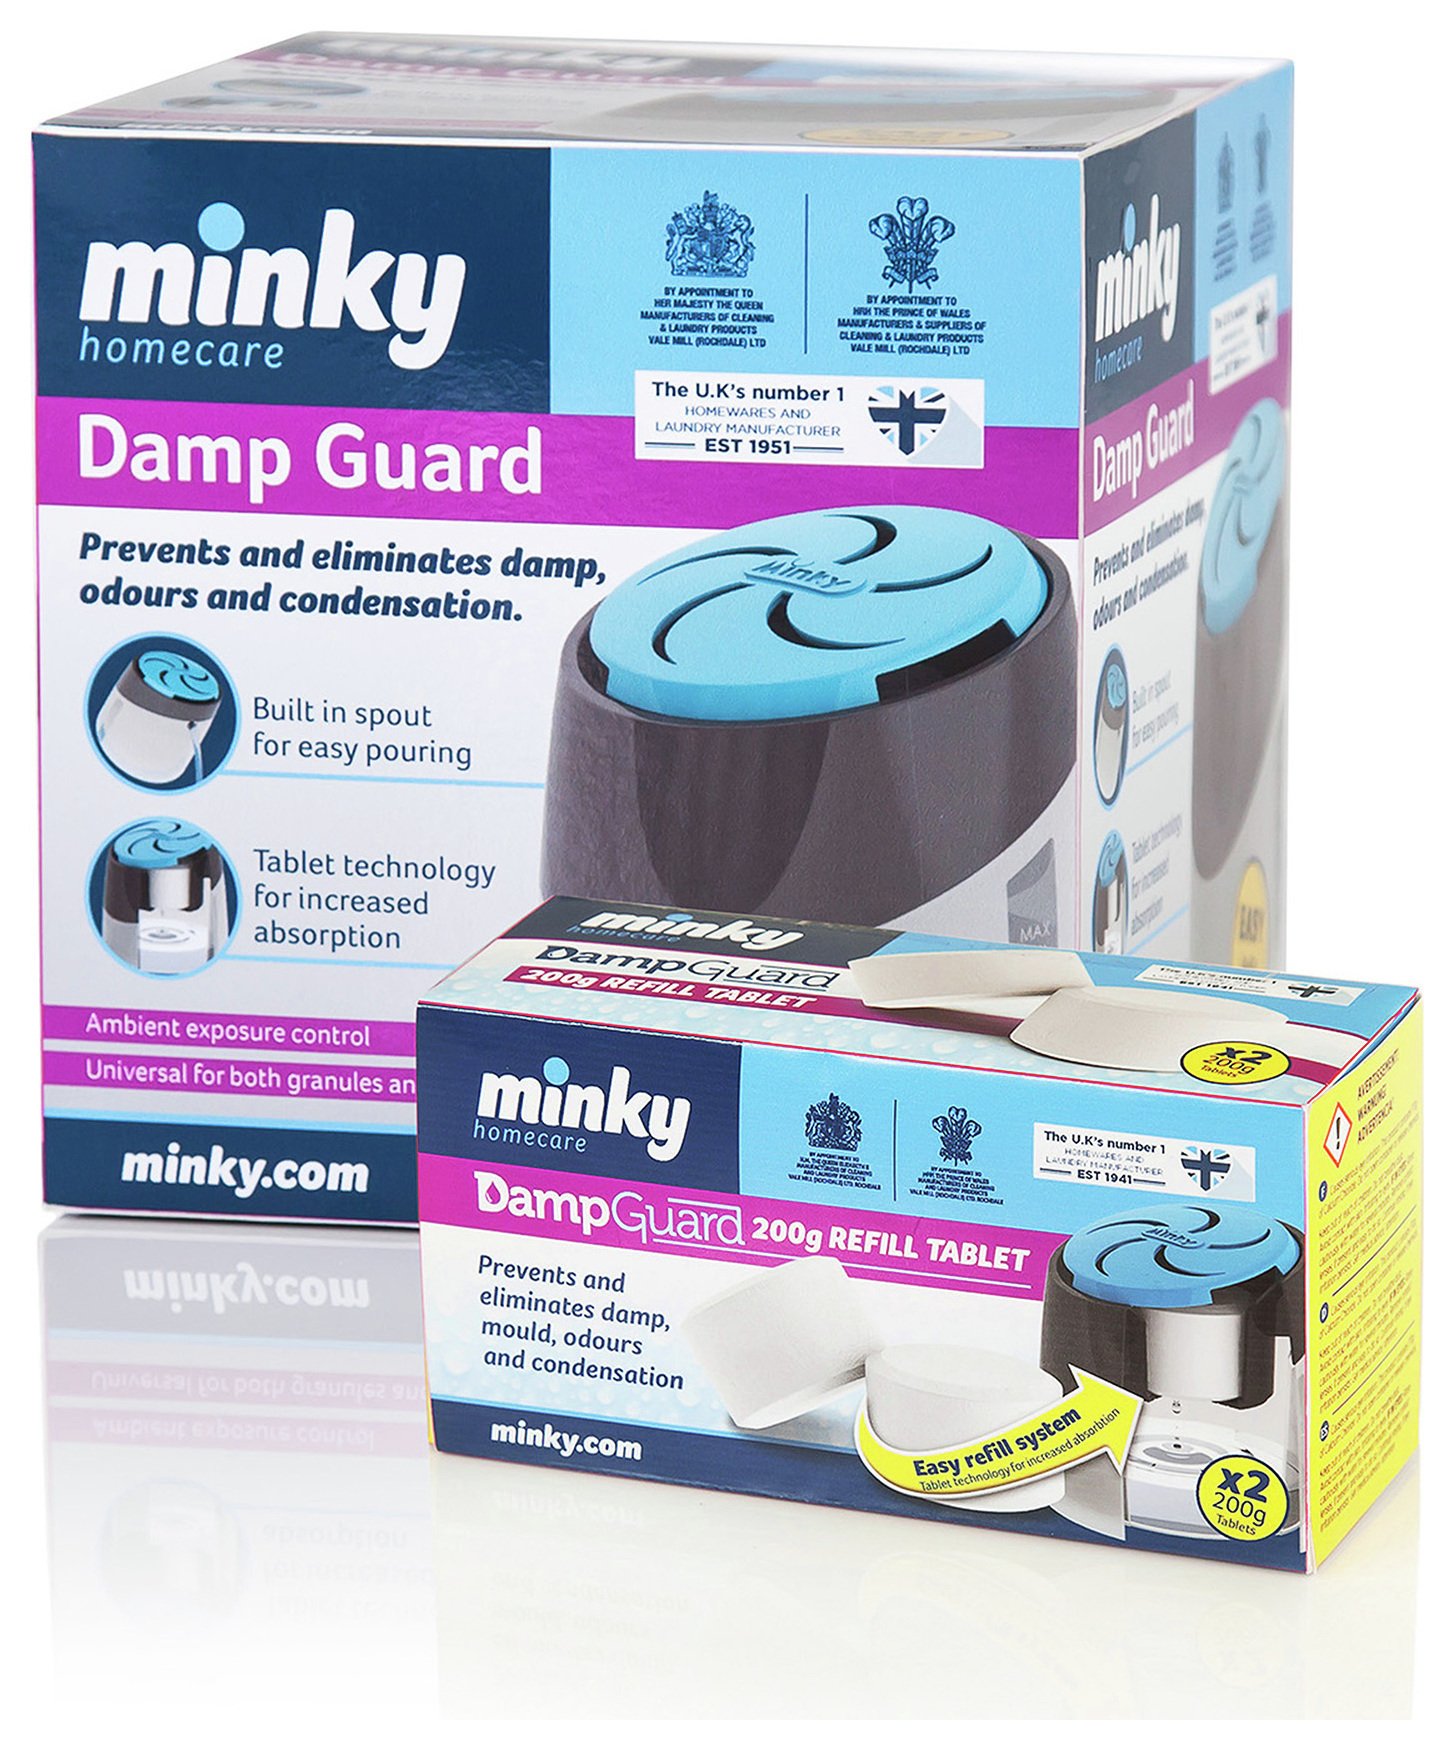 Minky Damp Guard with 4 Refills review